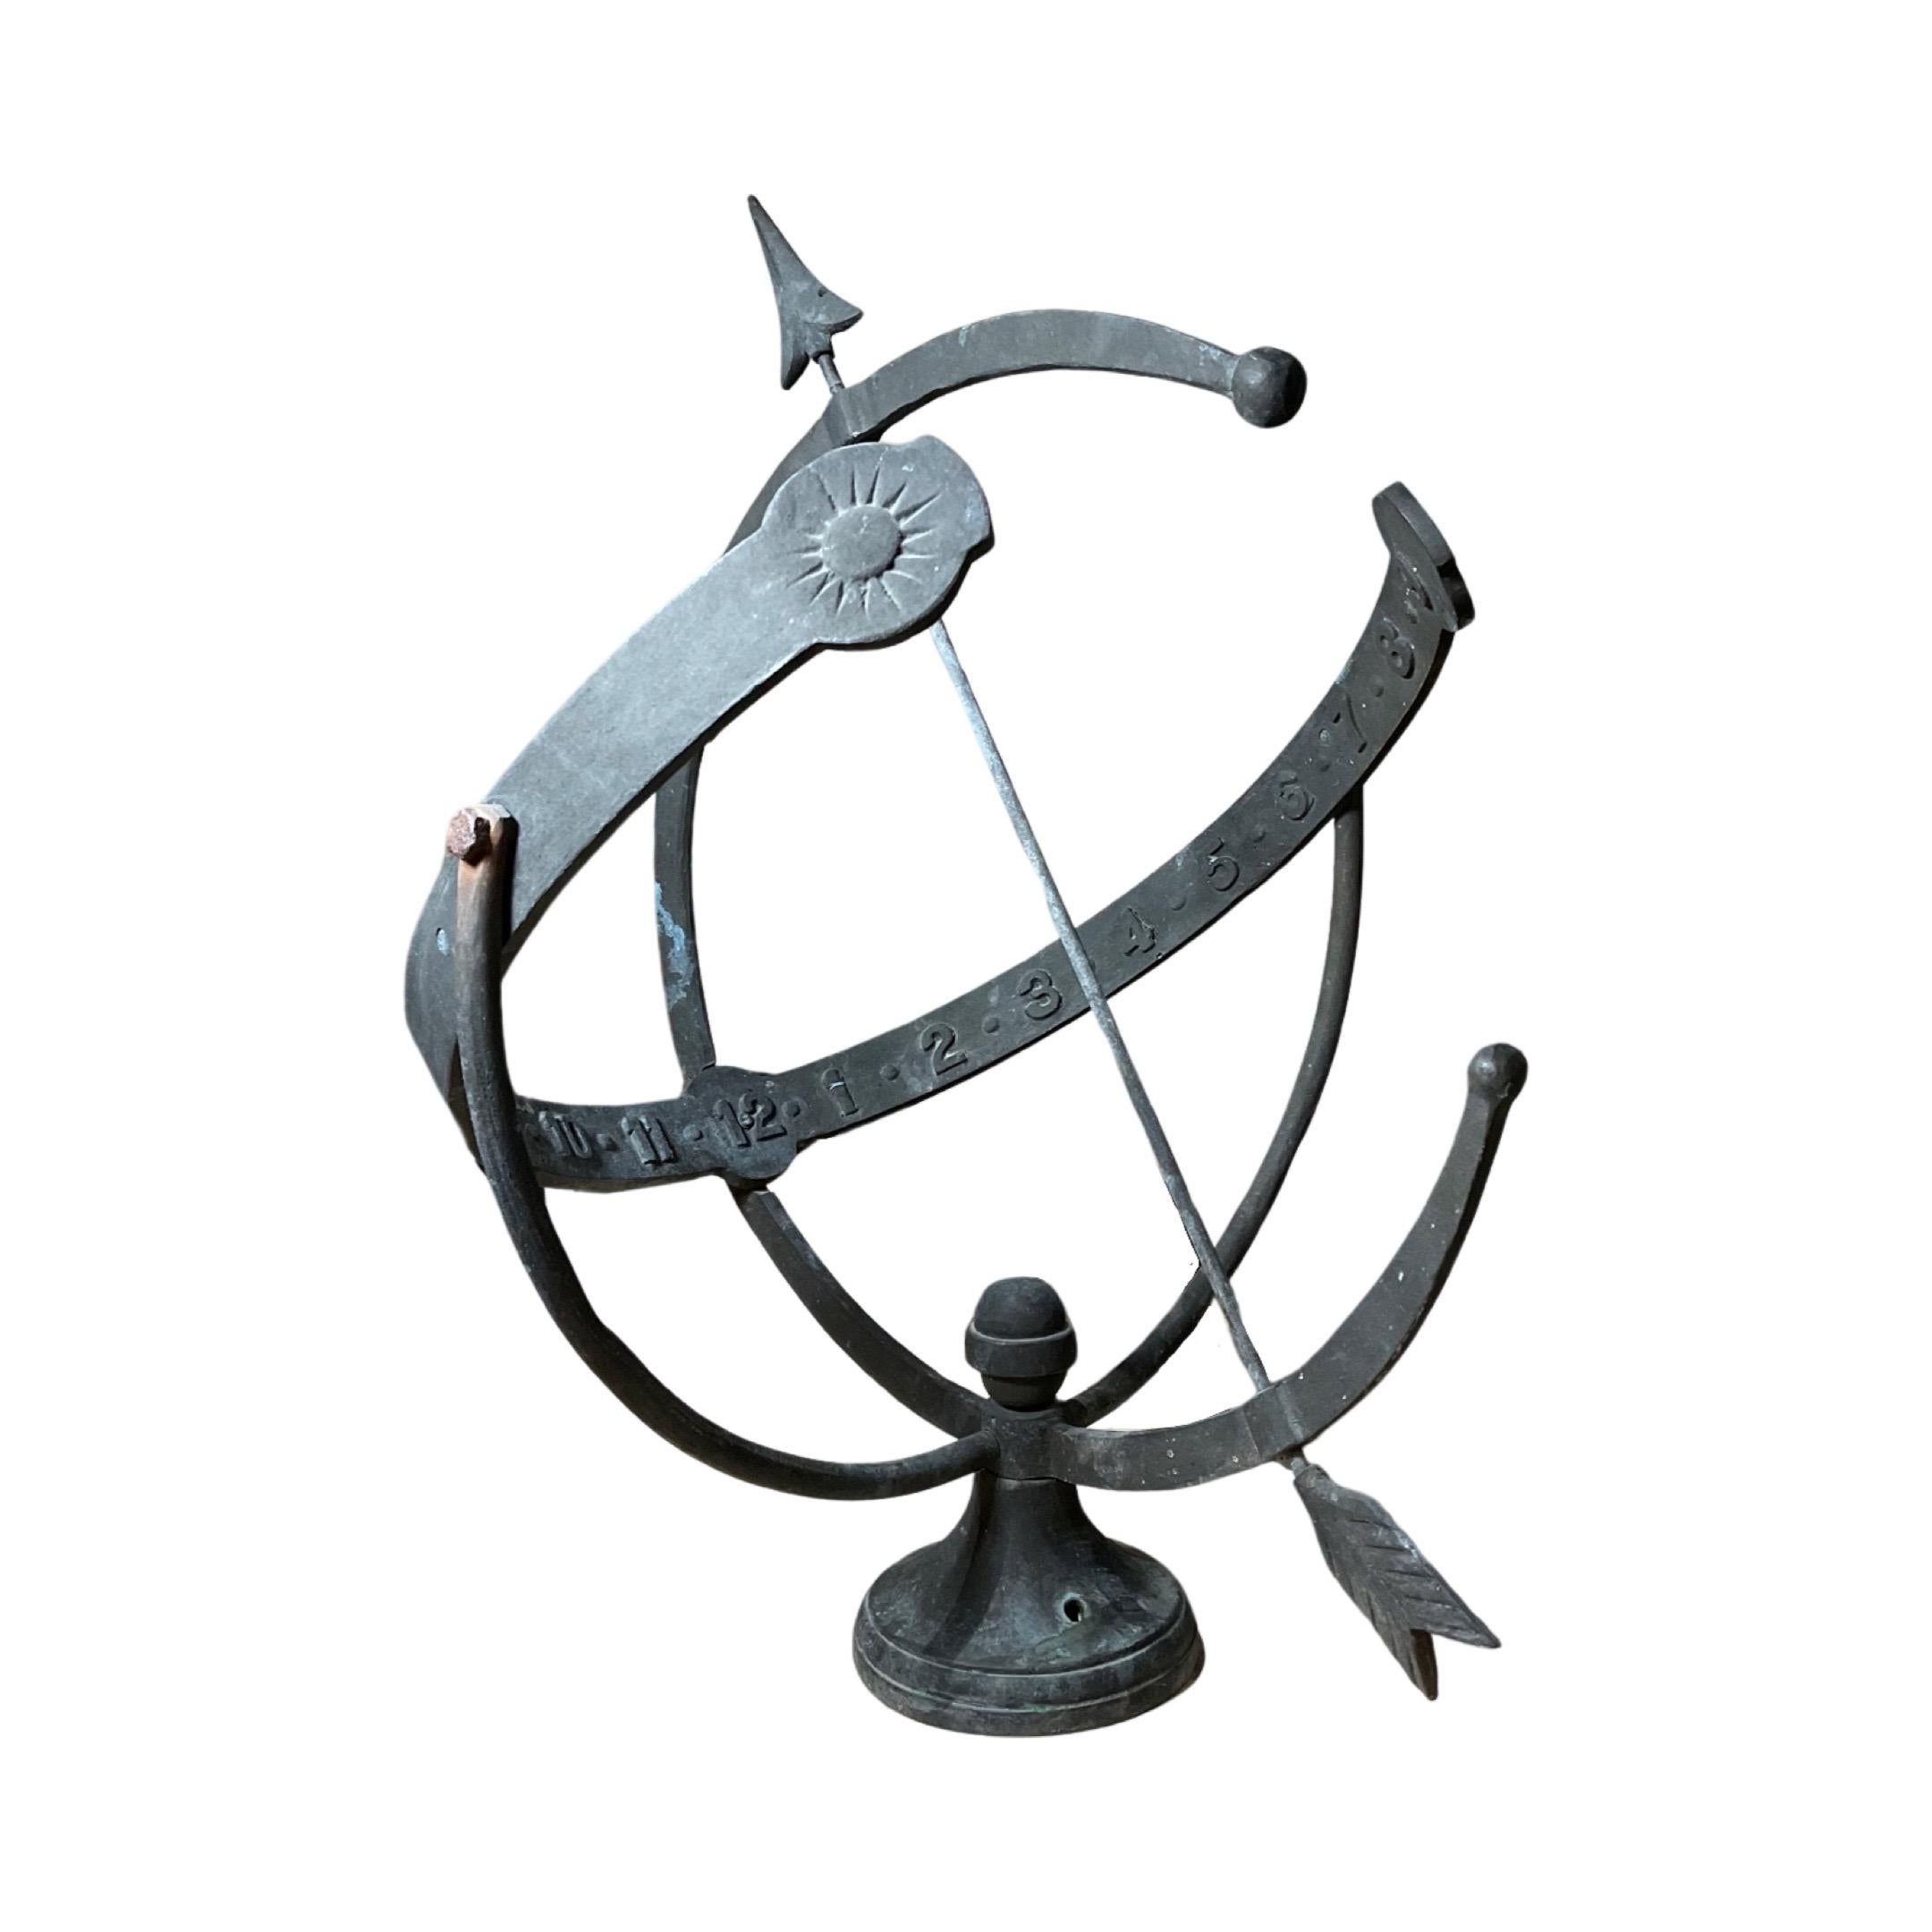 Expertly crafted in 19th century France, this bronze sundial adds a touch of elegance and charm to any garden. Its small size makes it the perfect accent piece, while its durability ensures long-lasting beauty. Make a statement with this unique and